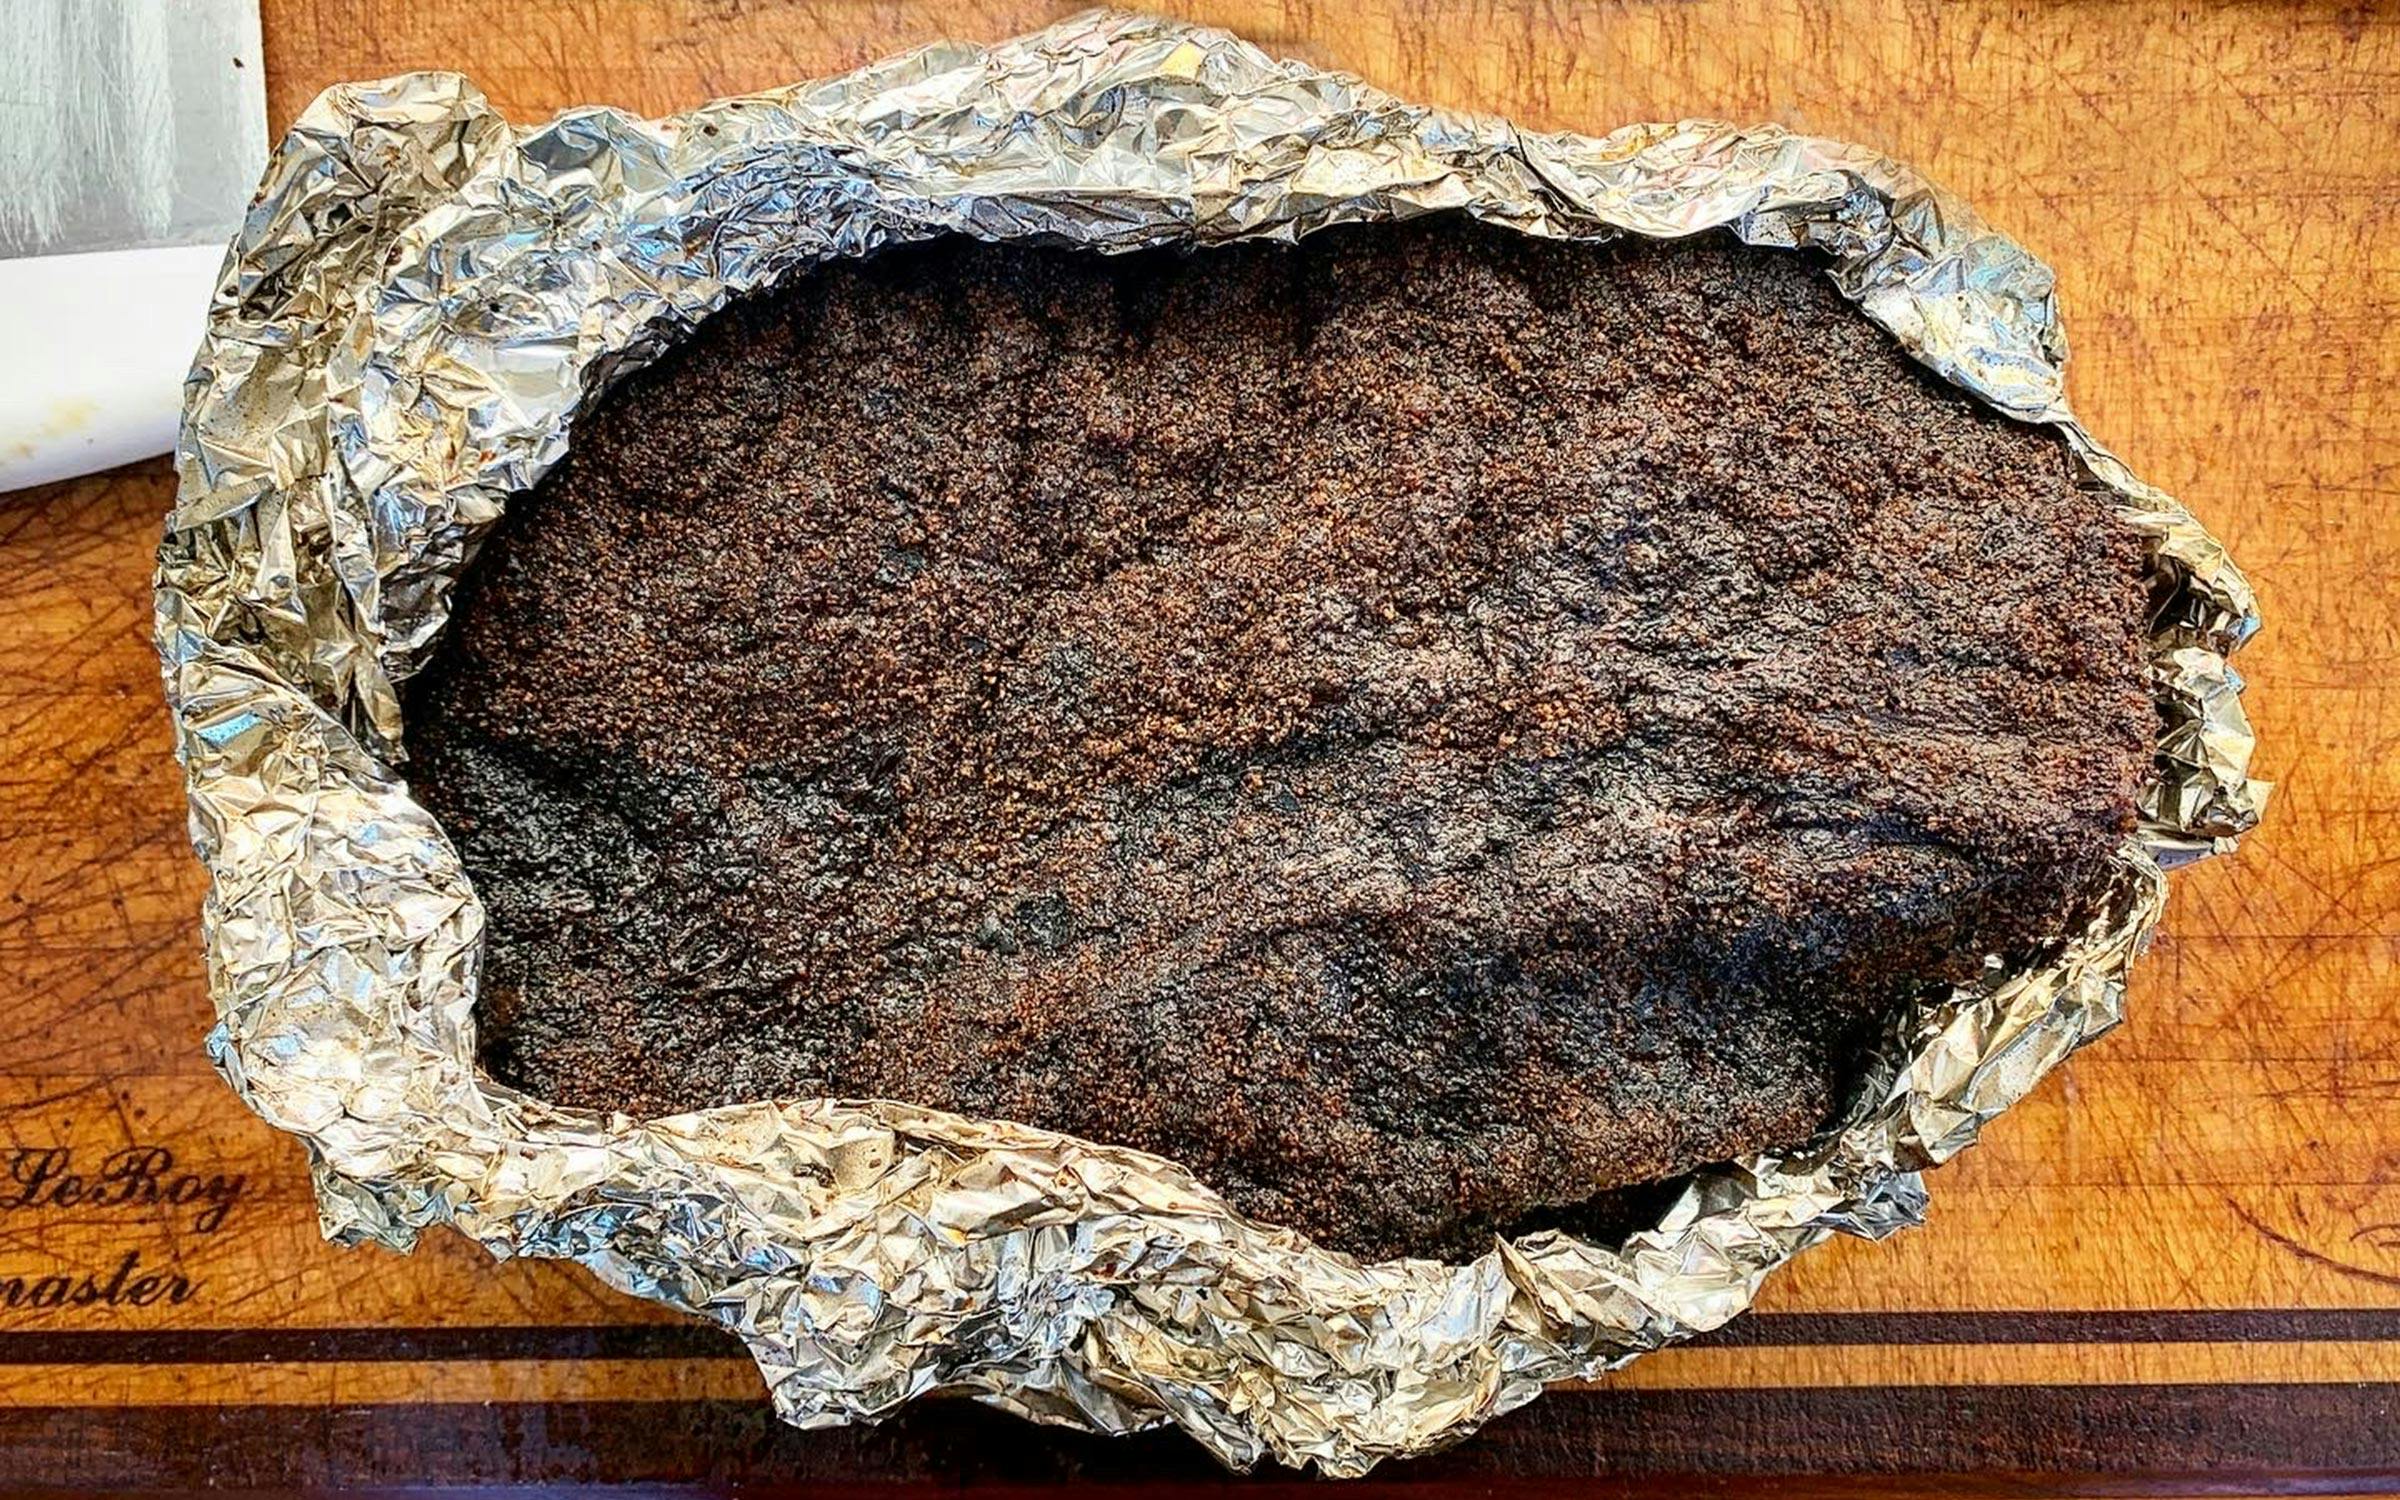 https://img.texasmonthly.com/2022/11/foil-boat-method-brisket.jpg?auto=compress&crop=faces&fit=fit&fm=pjpg&ixlib=php-3.3.1&q=45